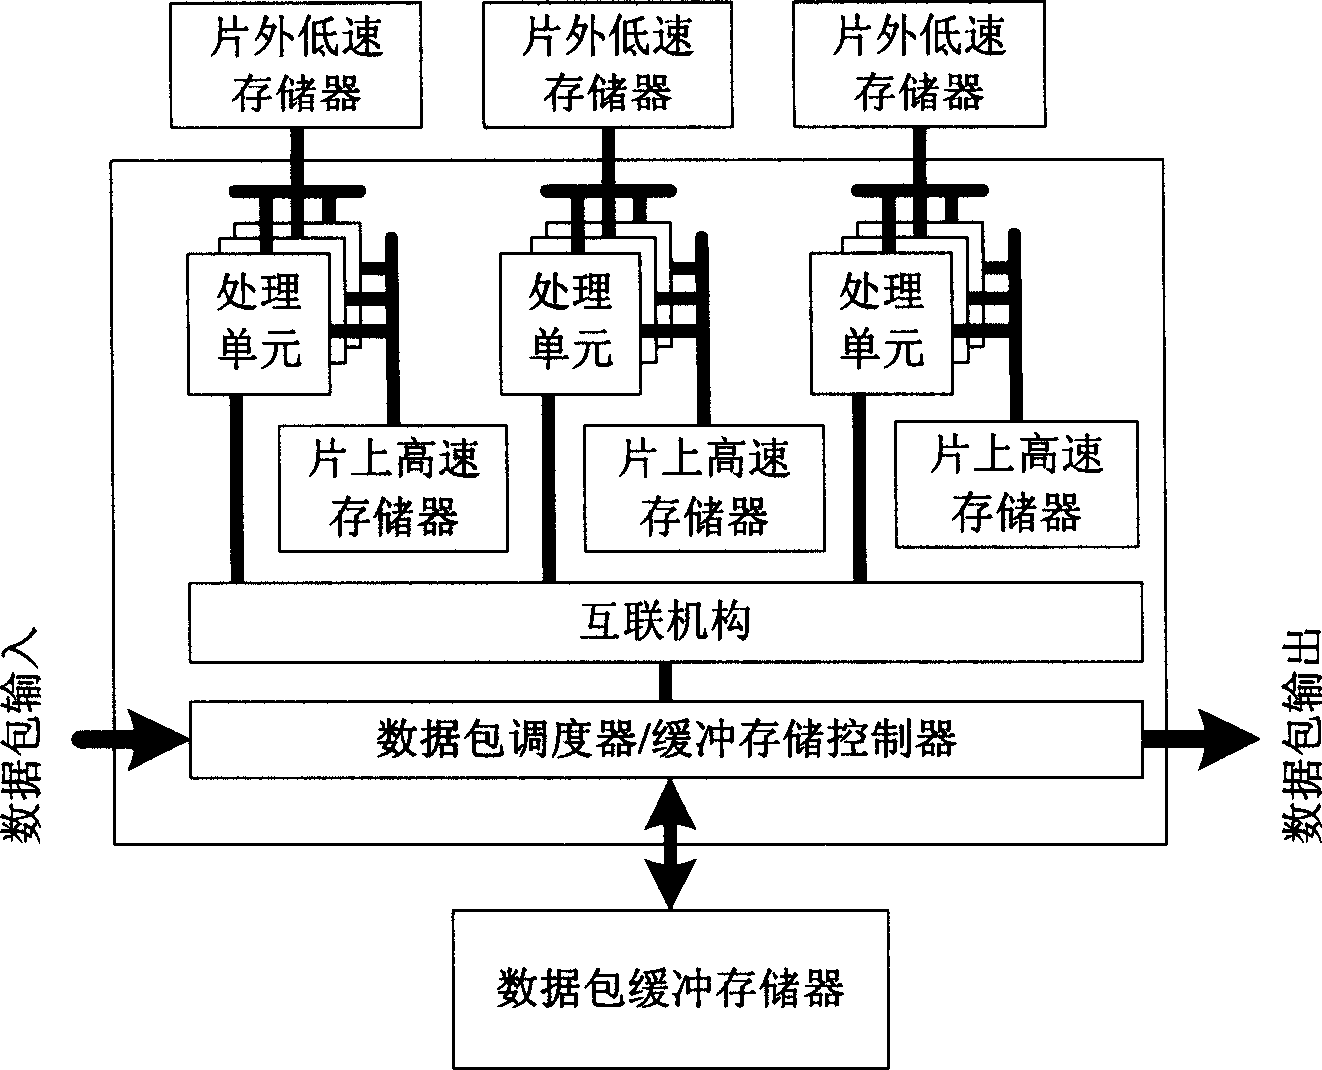 Route searching result cache method based on network processor